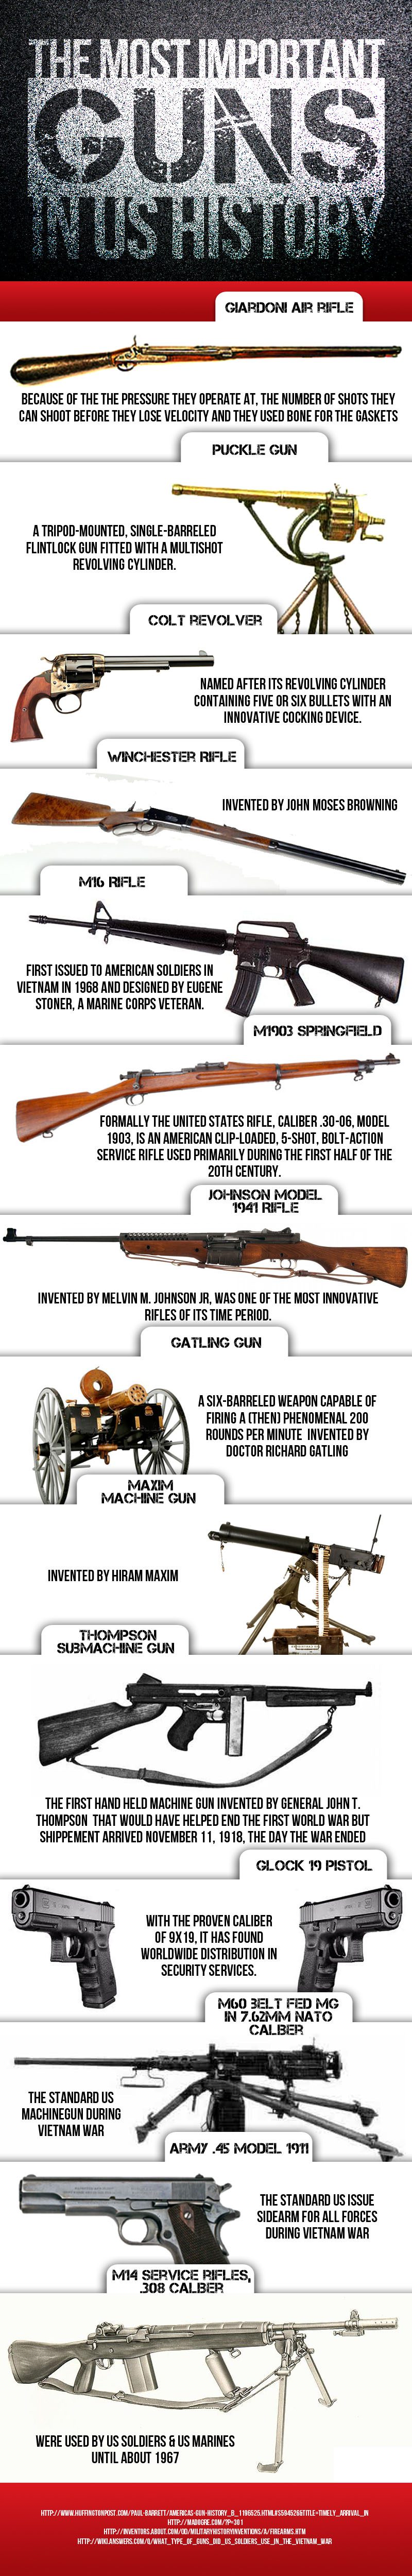 When Was the Lever Action Rifle Invented